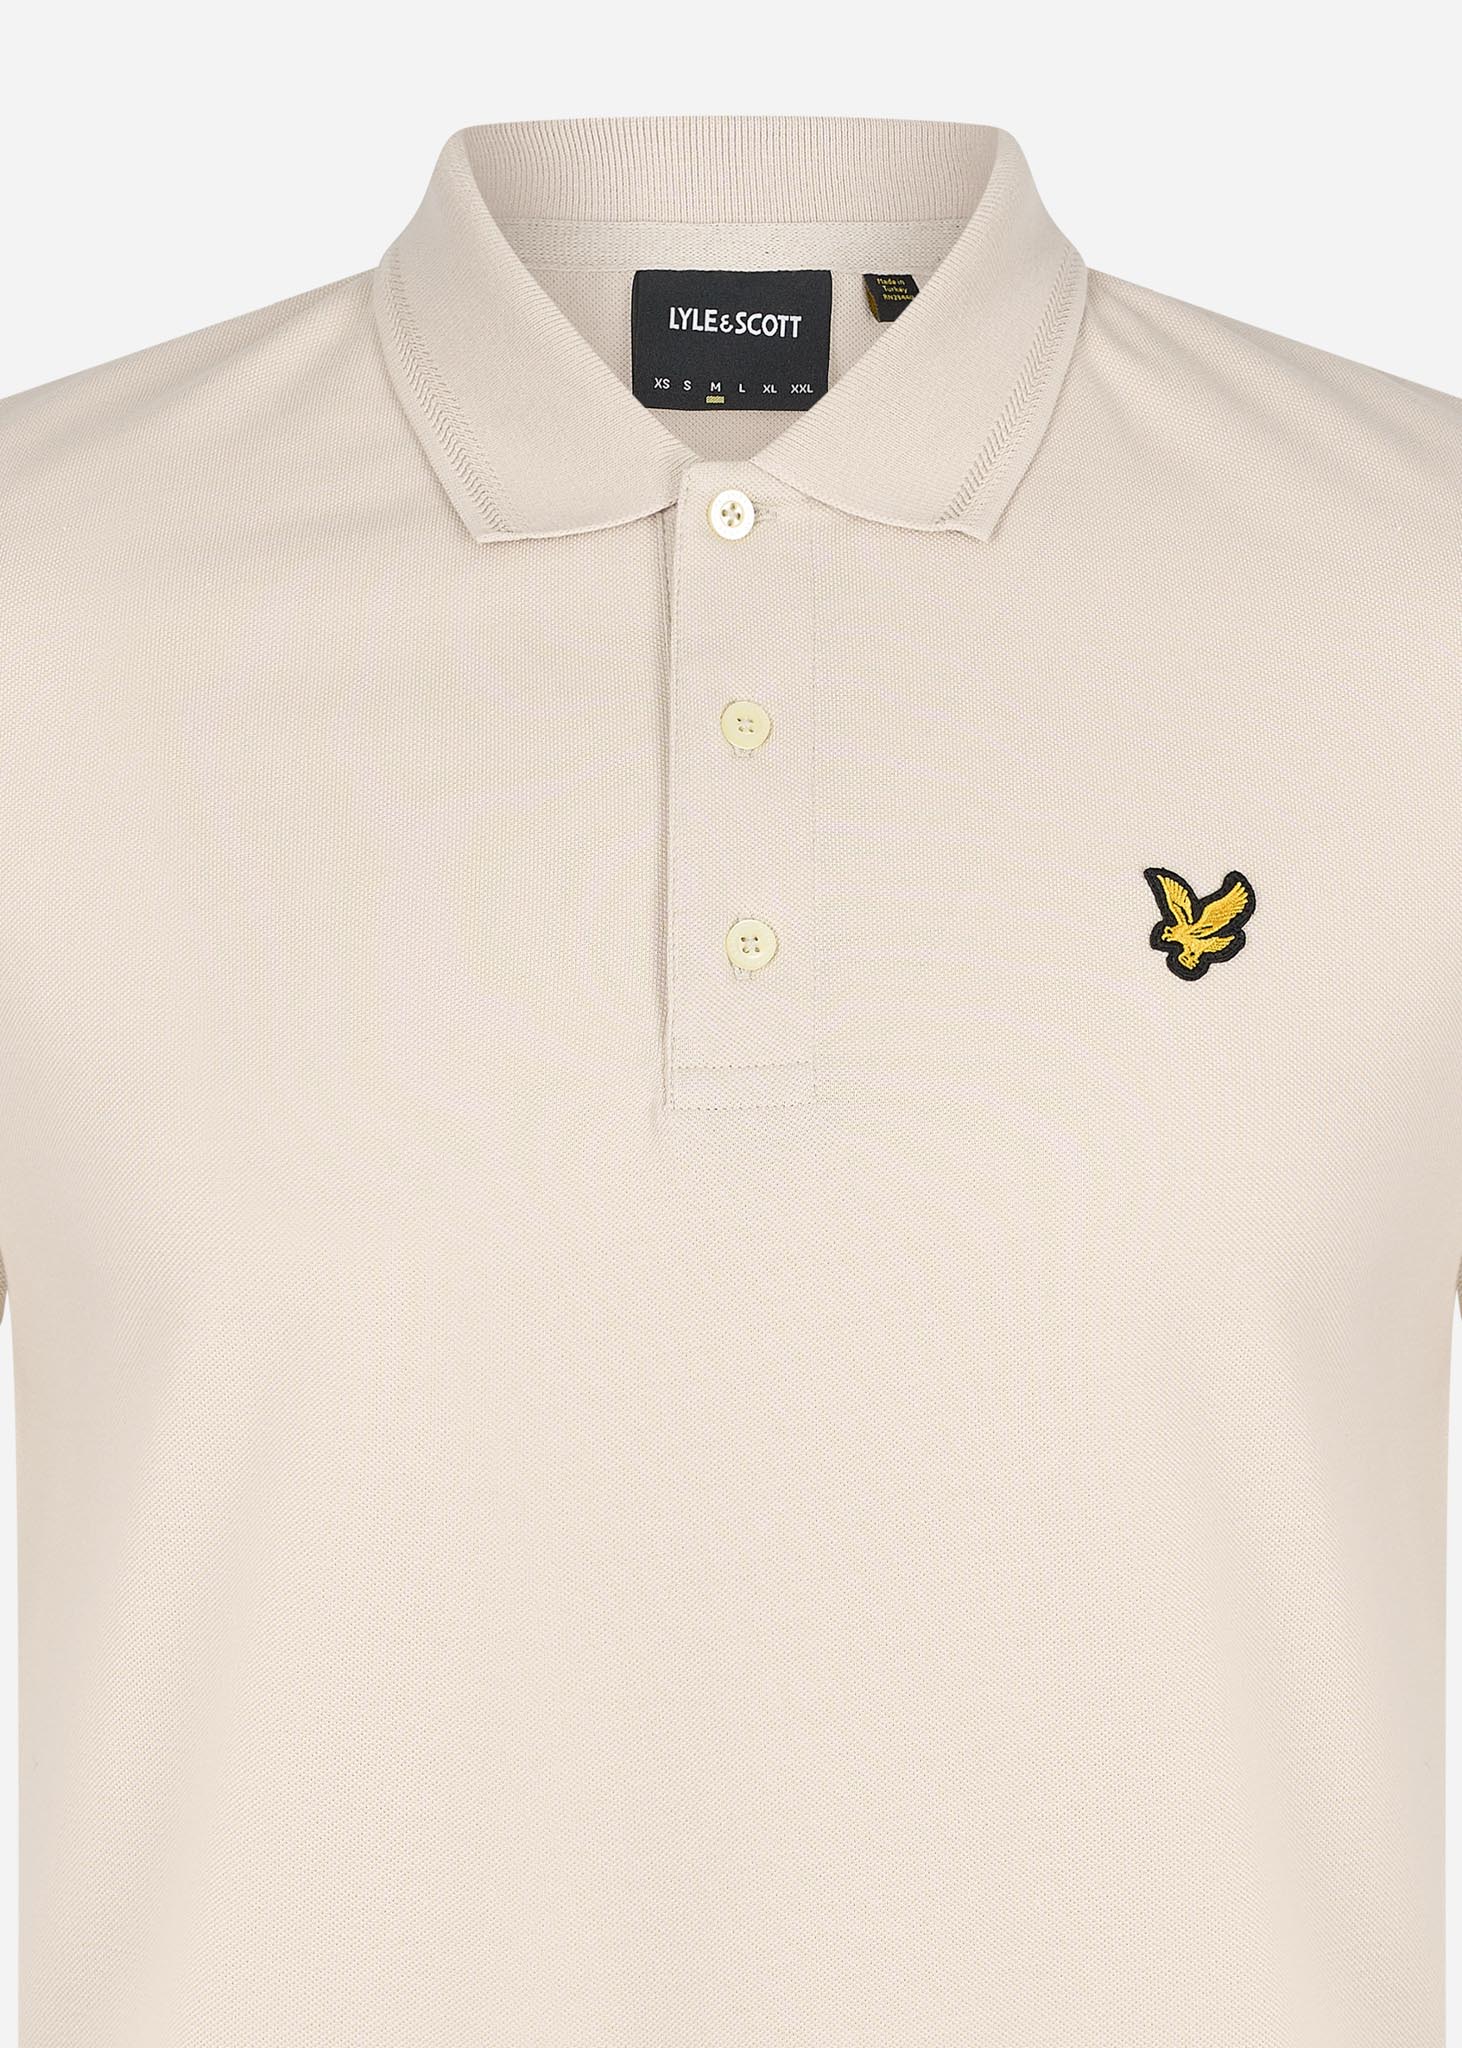 Lyle & Scott Polo's  Crest tipped polo shirt - cove 